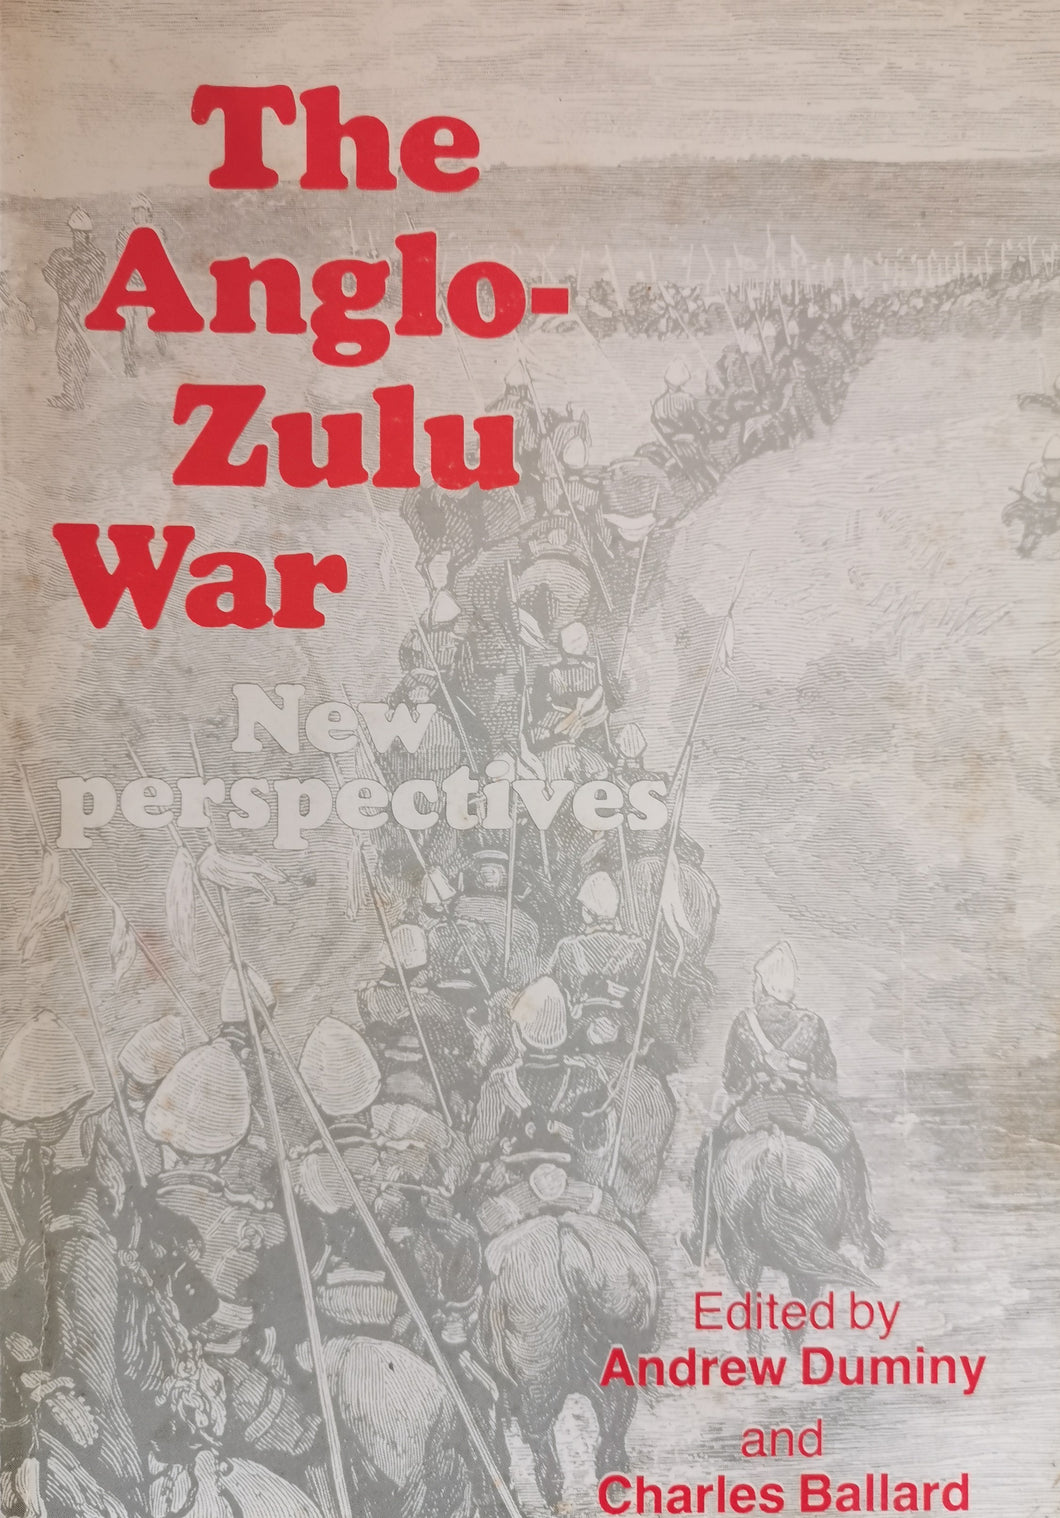 The Anglo-Zulu War: New Perspectives by A. Duminy and C. Ballard